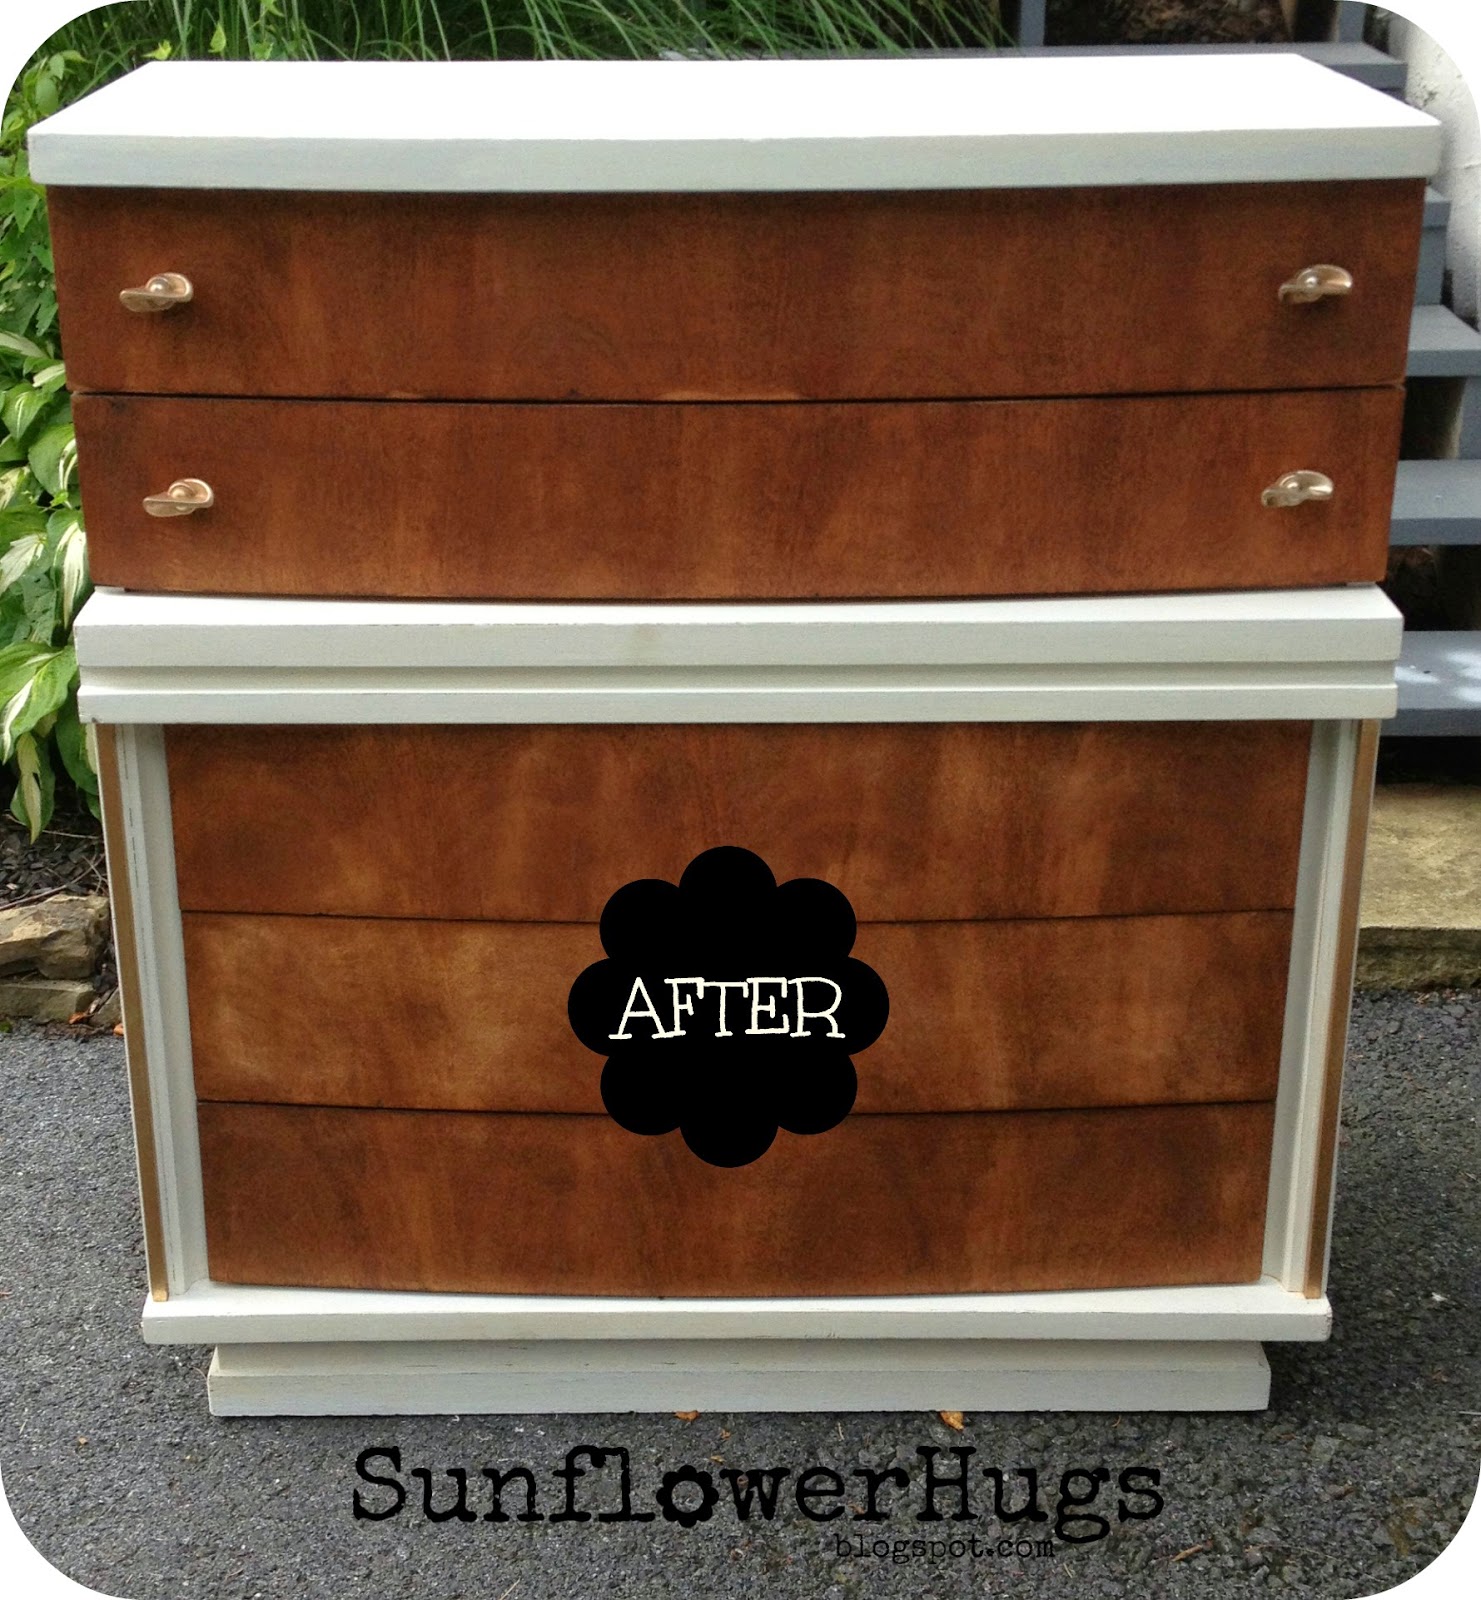 SunflowerHugs: I finally stain the top of something!  Green wood stain, Staining  wood, Refinishing furniture